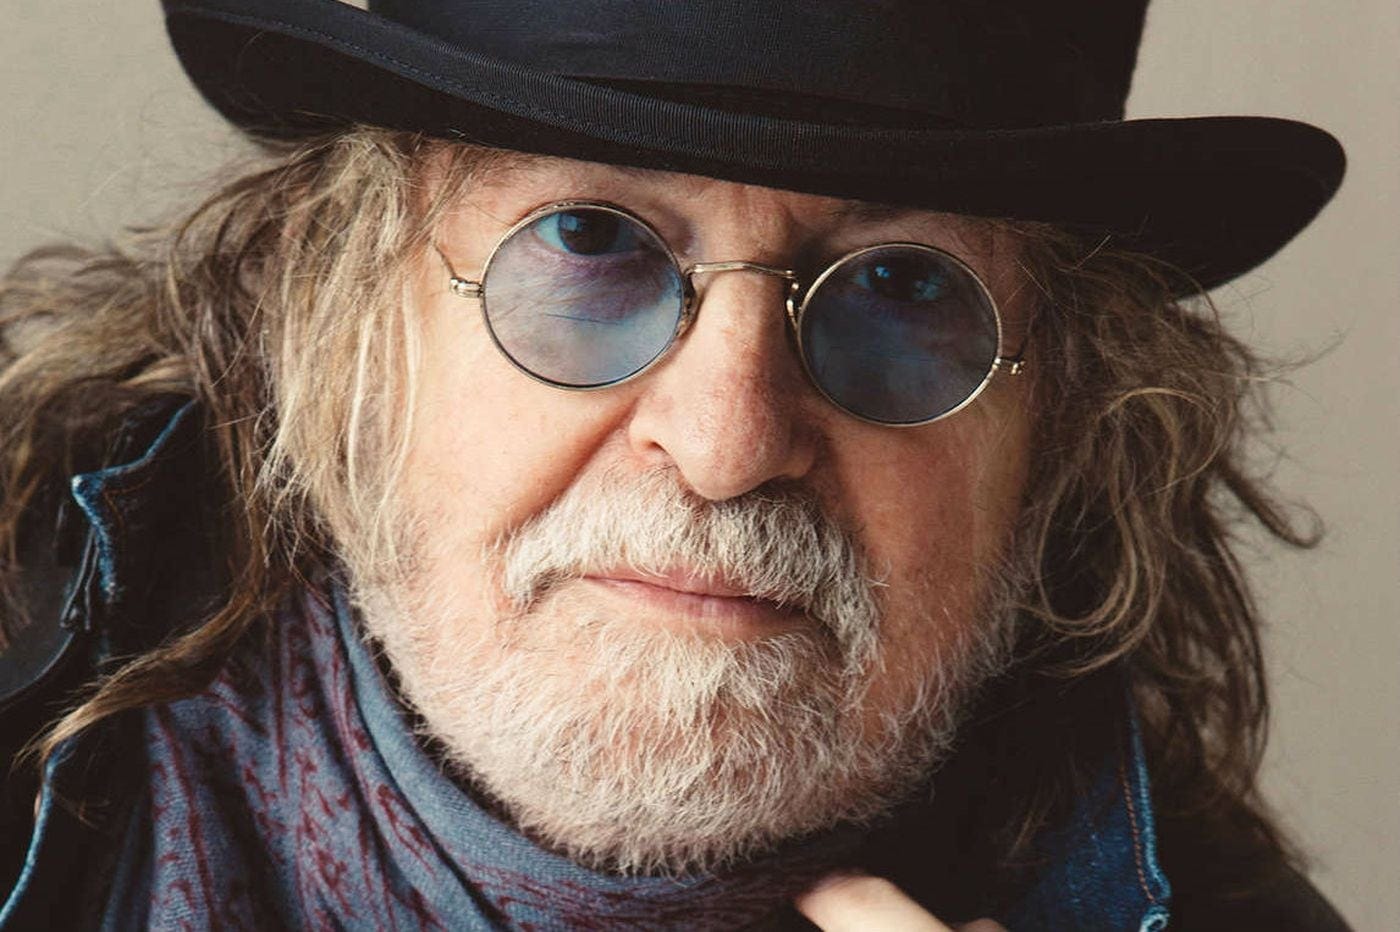 Texas troubadour Ray Wylie Hubbard finds his groove(s)